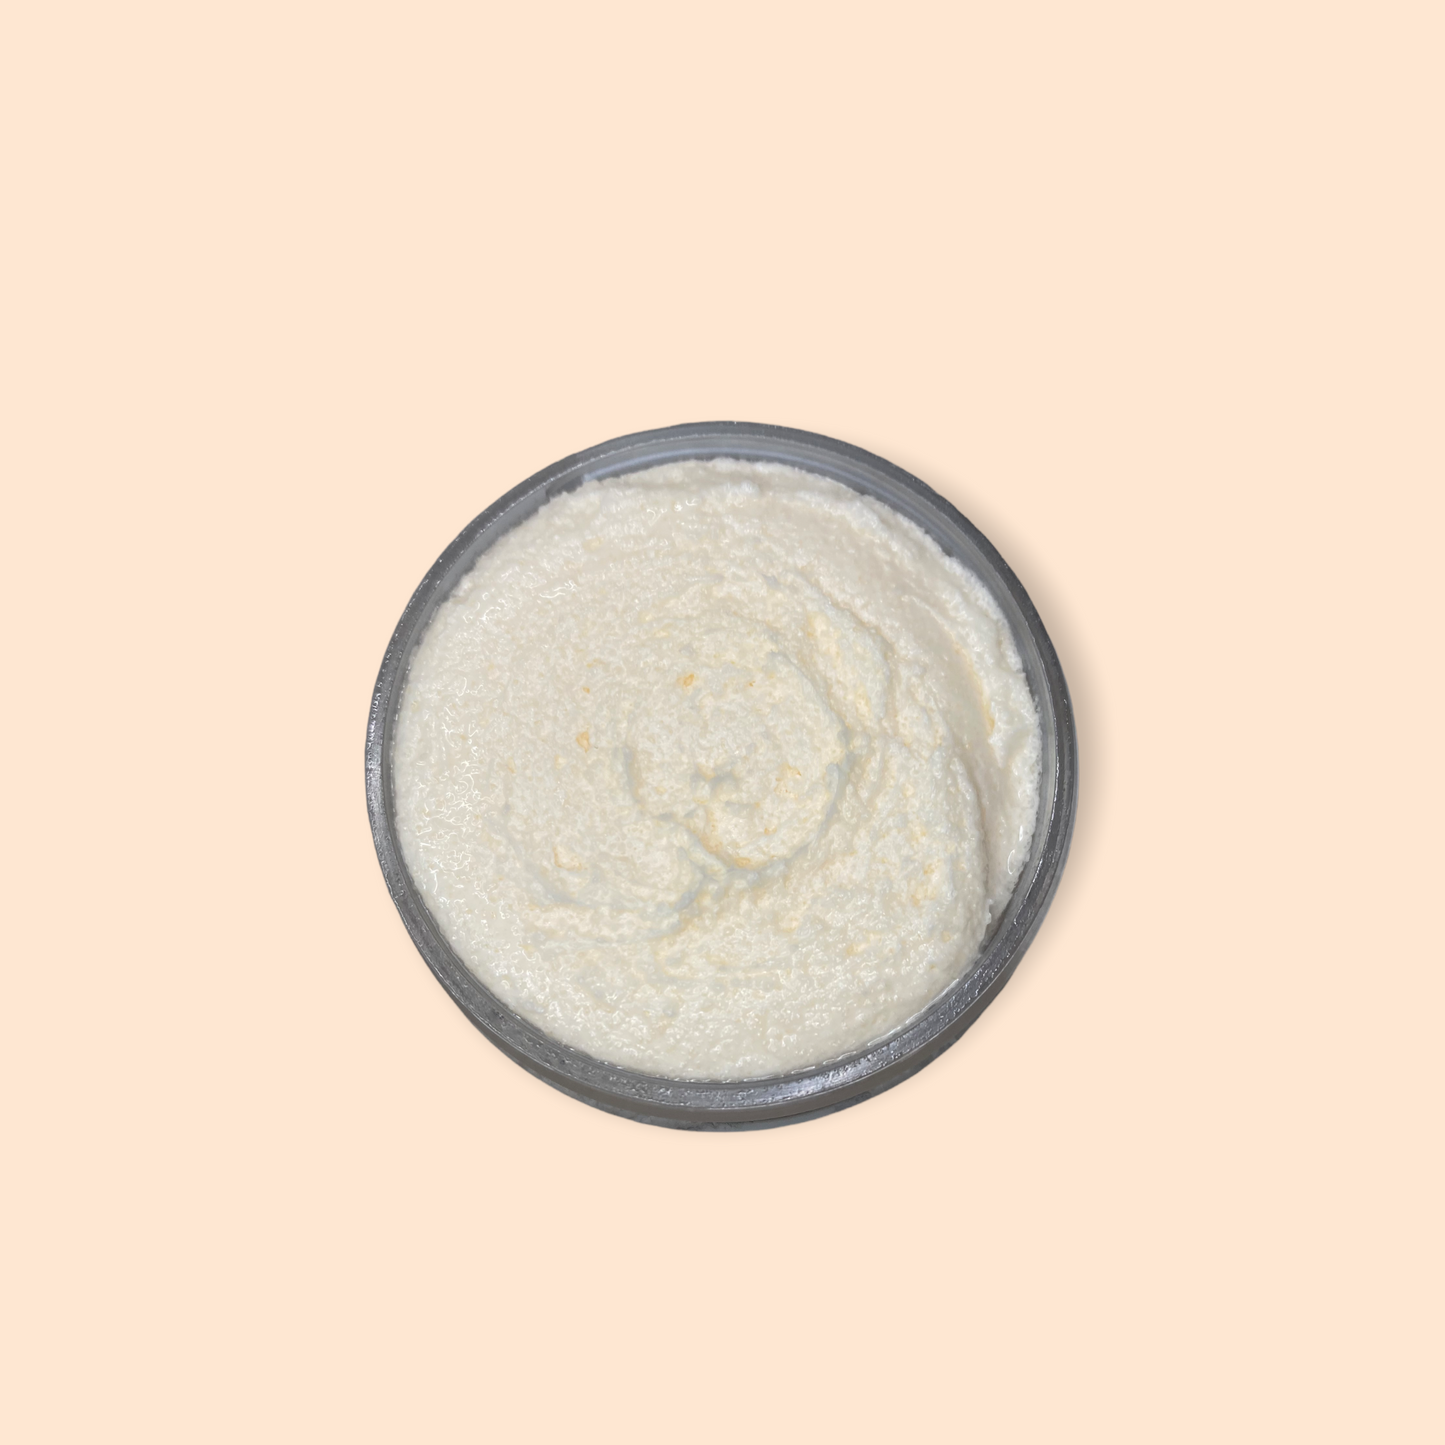 THE SOUTHERN BELLE WHIPPED SUGAR SCRUB